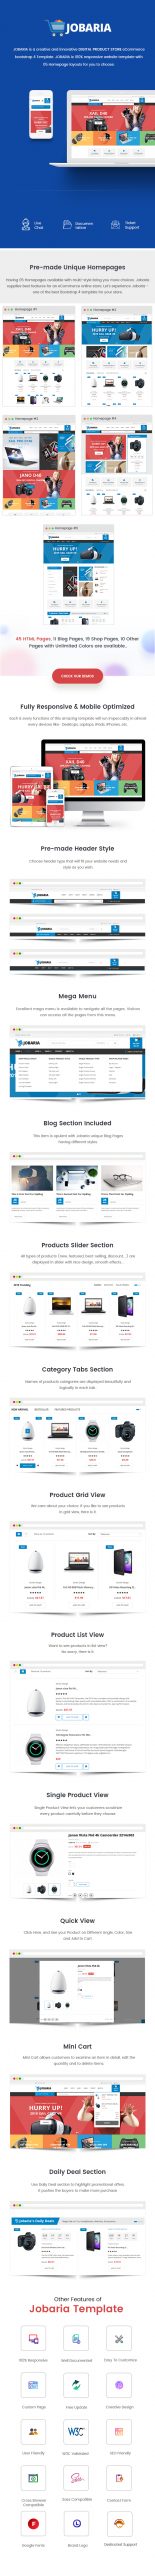 Jobaria - Digital Products Store eCommerce Bootstrap 4 Template - 1